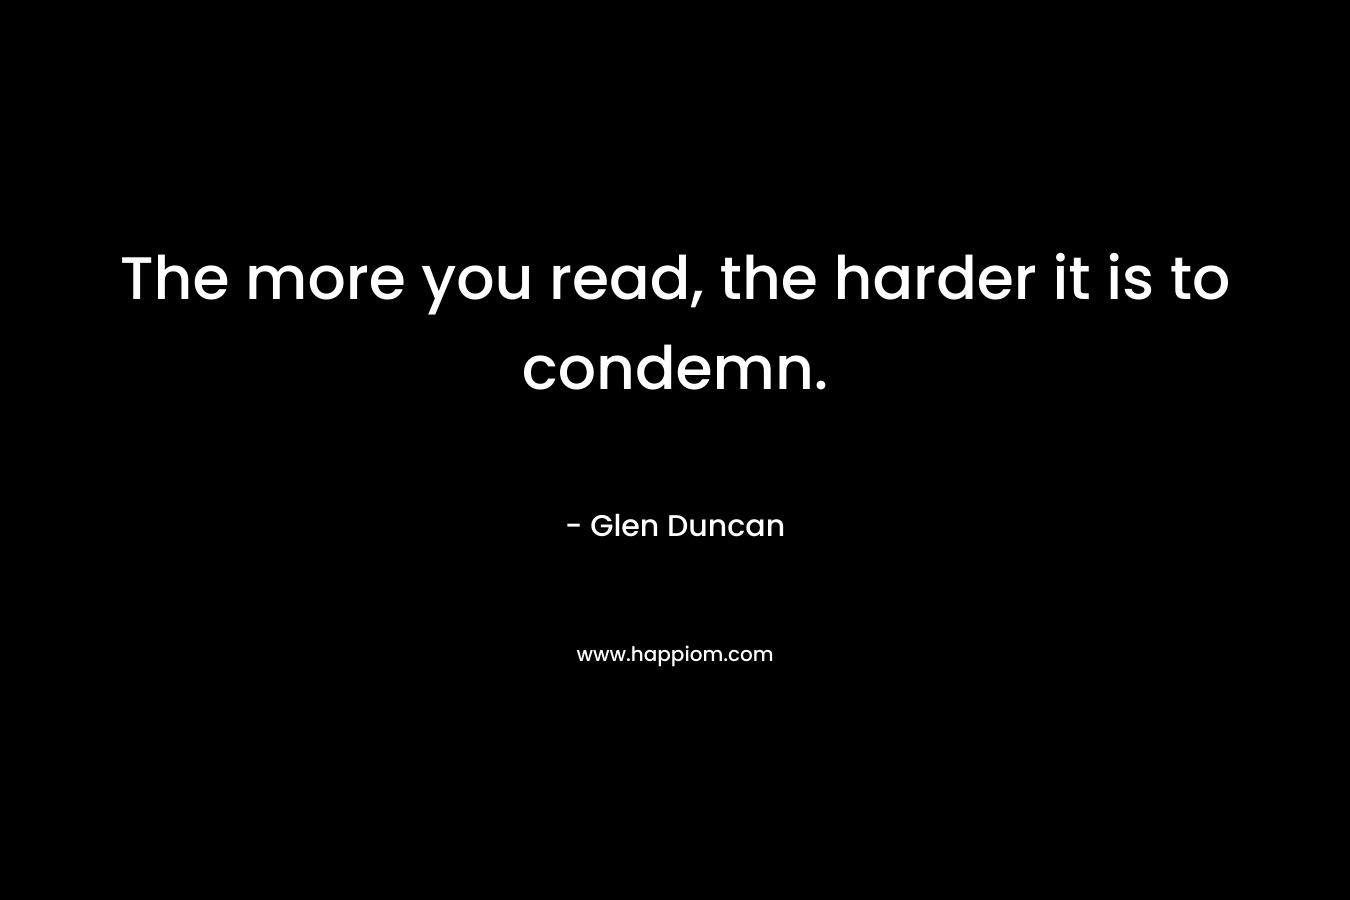 The more you read, the harder it is to condemn. – Glen Duncan